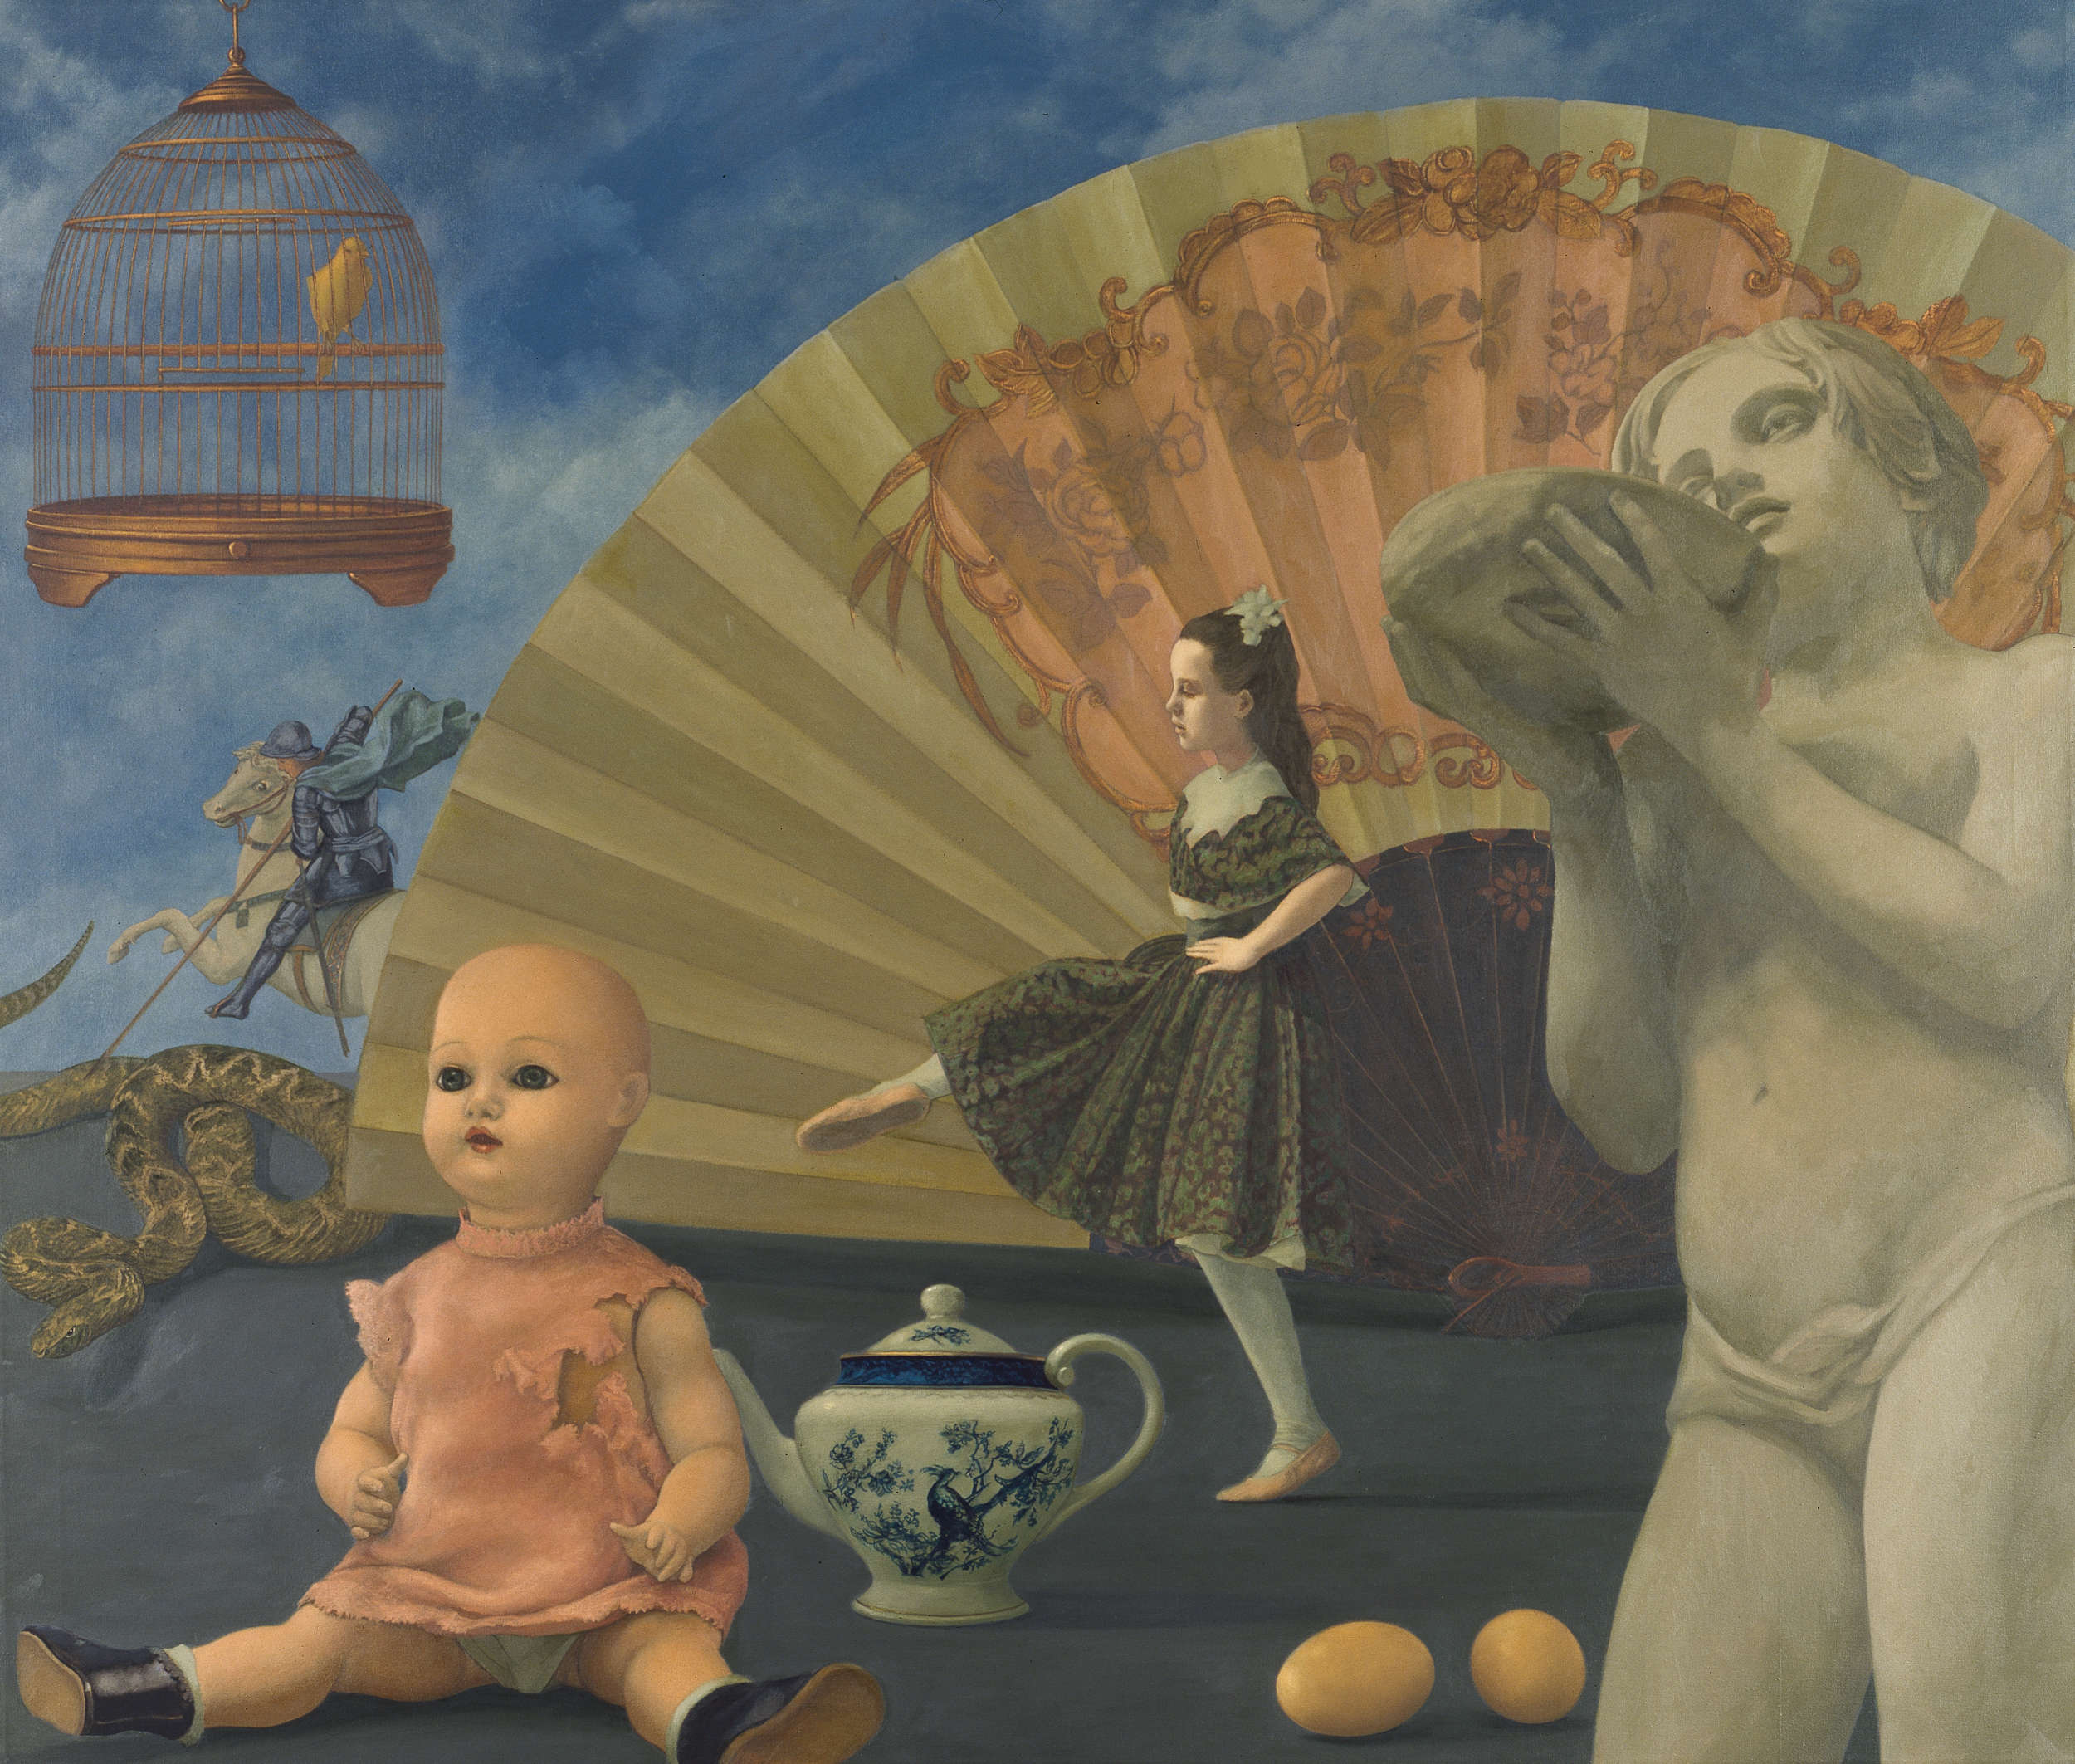 giant doll, little girl dancing,oriental fan,knight riding a white horse, serpent,bird in a gilded cage,statue of a boy, eggs, teapot, sky